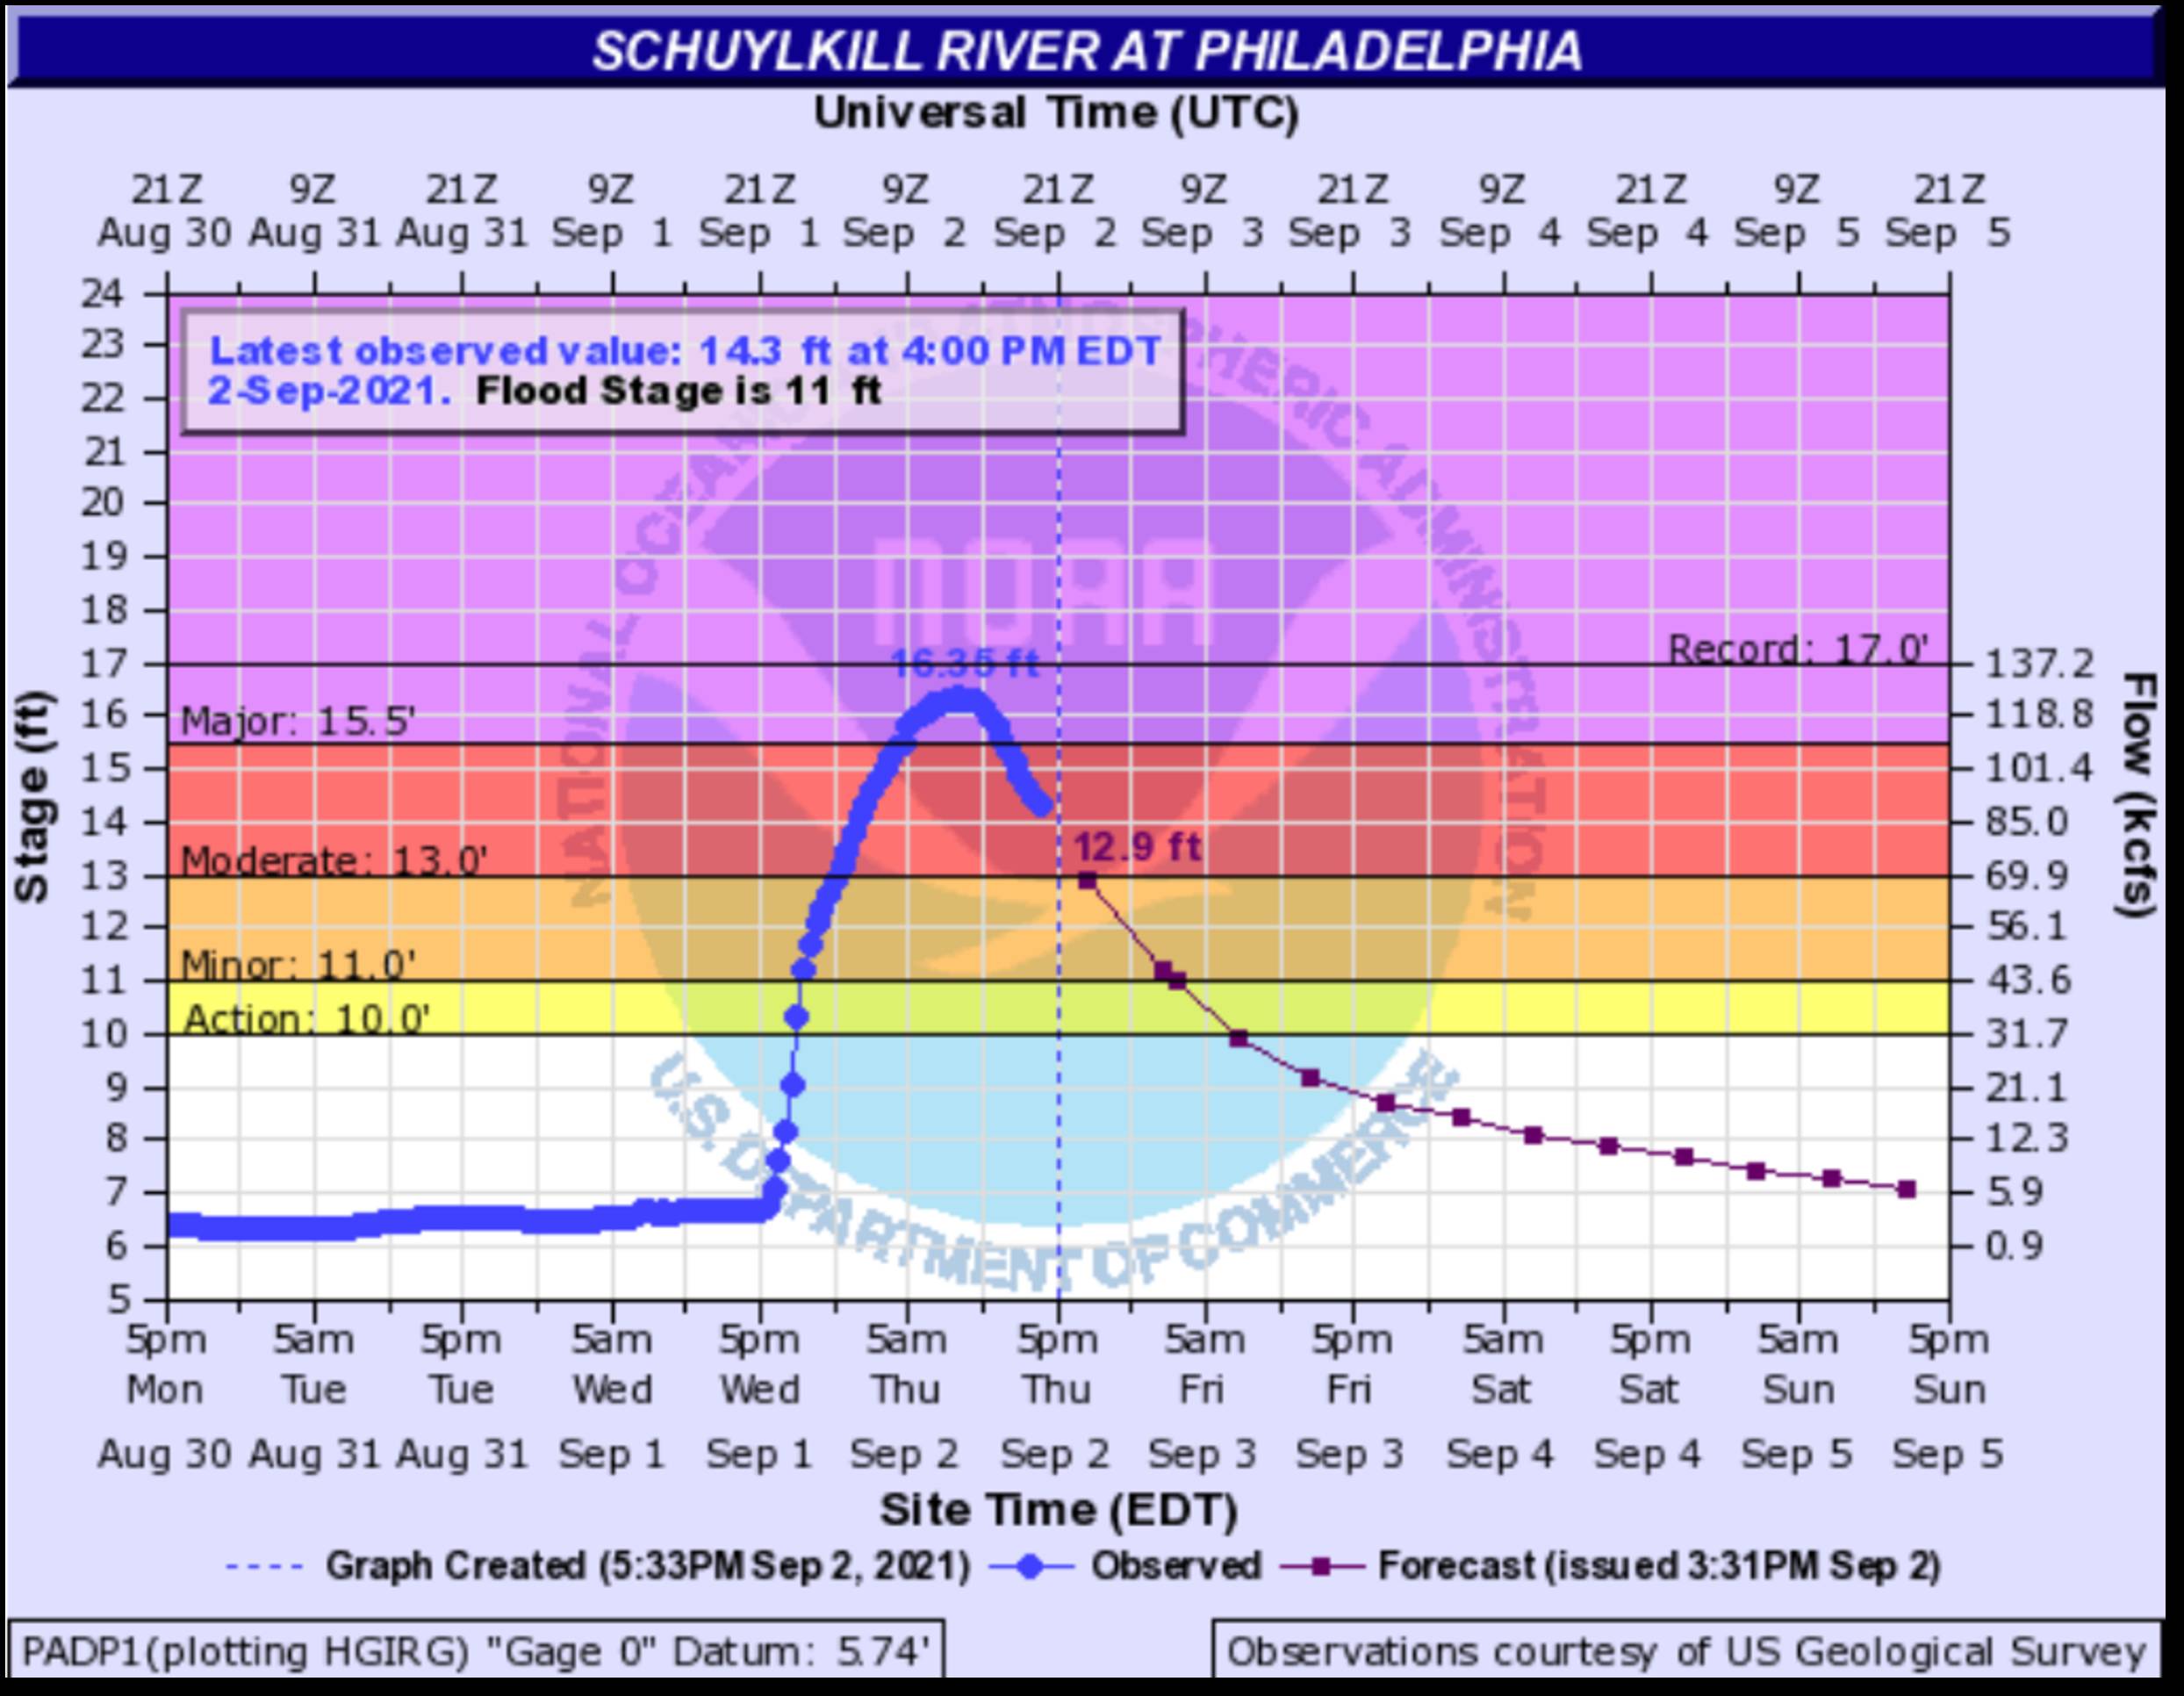 National Hydrologic Prediction Service page for the Schuylkill River at Boat House Row. Records flood levels along with predictions. In my experience the predictions are always high and must be taken with a grain of salt. It's more accurate to look at the curve from the graphs and you can anticipate when it will start to flatten out.